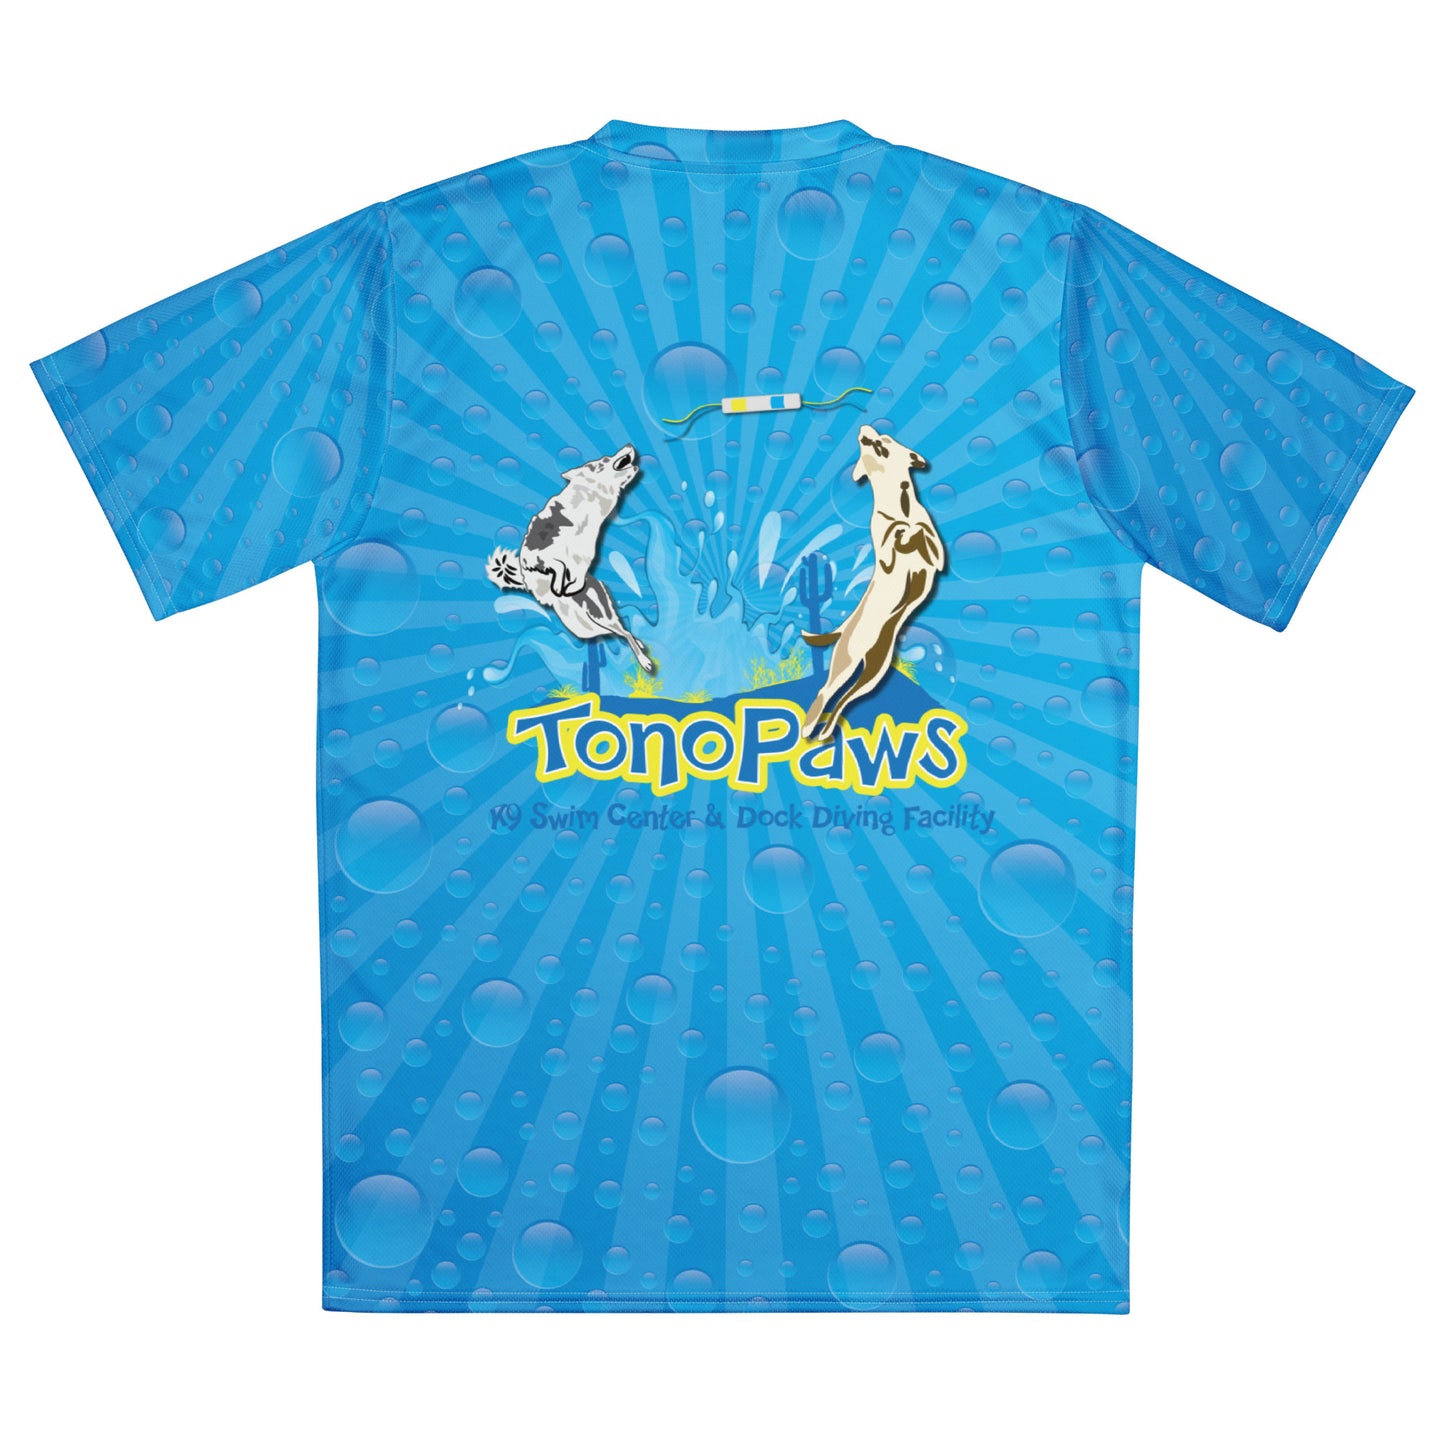 TONOPAWS 2 Recycled unisex sports jersey